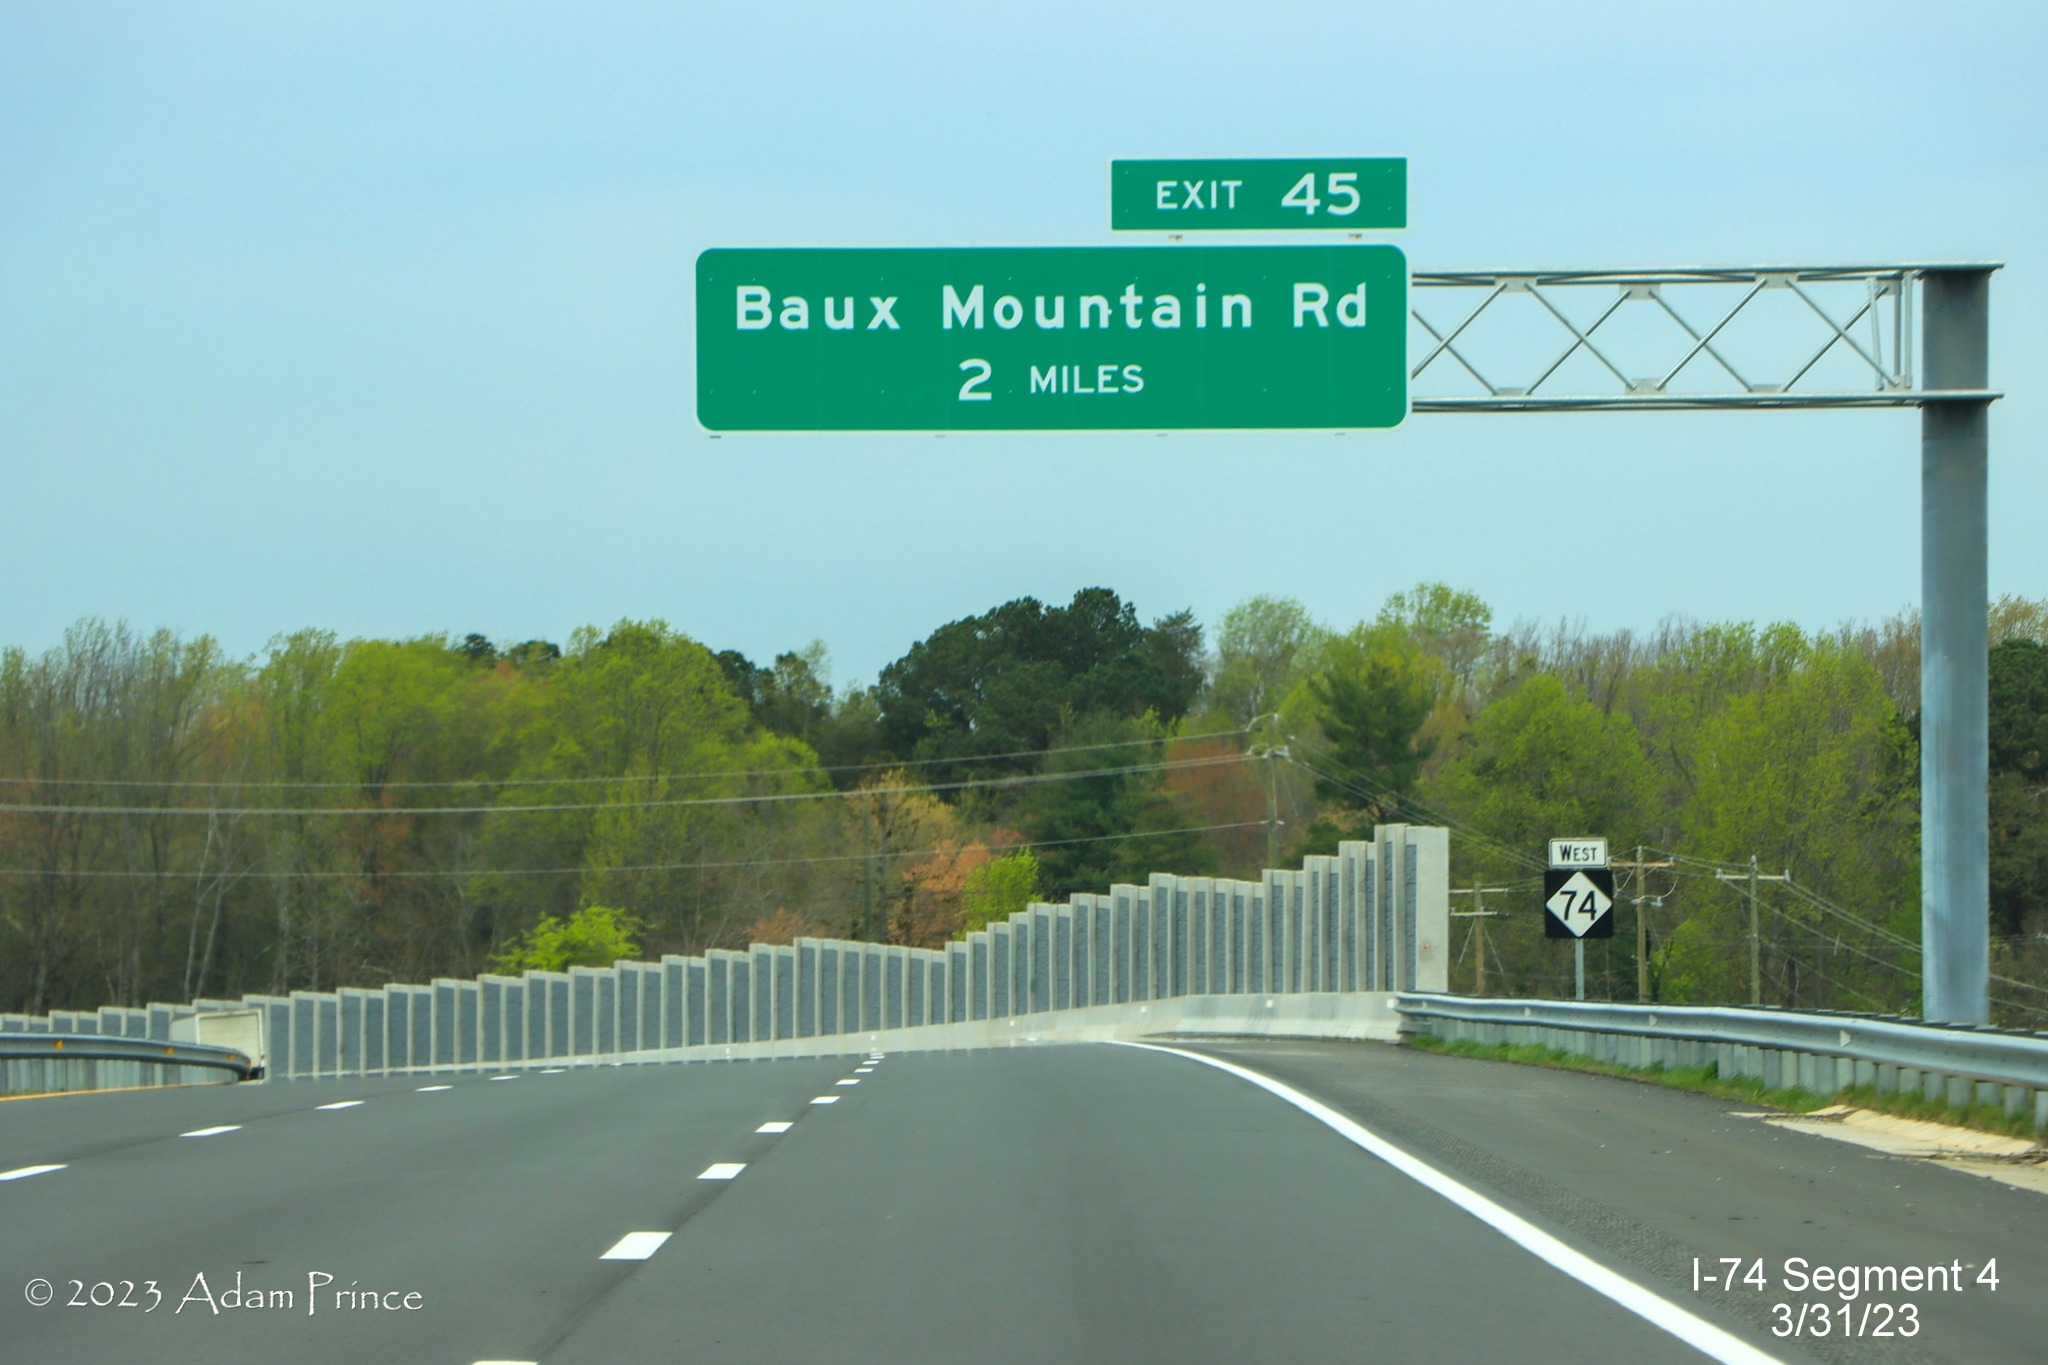 Image of 2 Miles advance sign for Baux Mountain Road exit on NC 74 (Future I-74) West/Winston-Salem 
        Northern Beltway, Adam Prince, March 2023